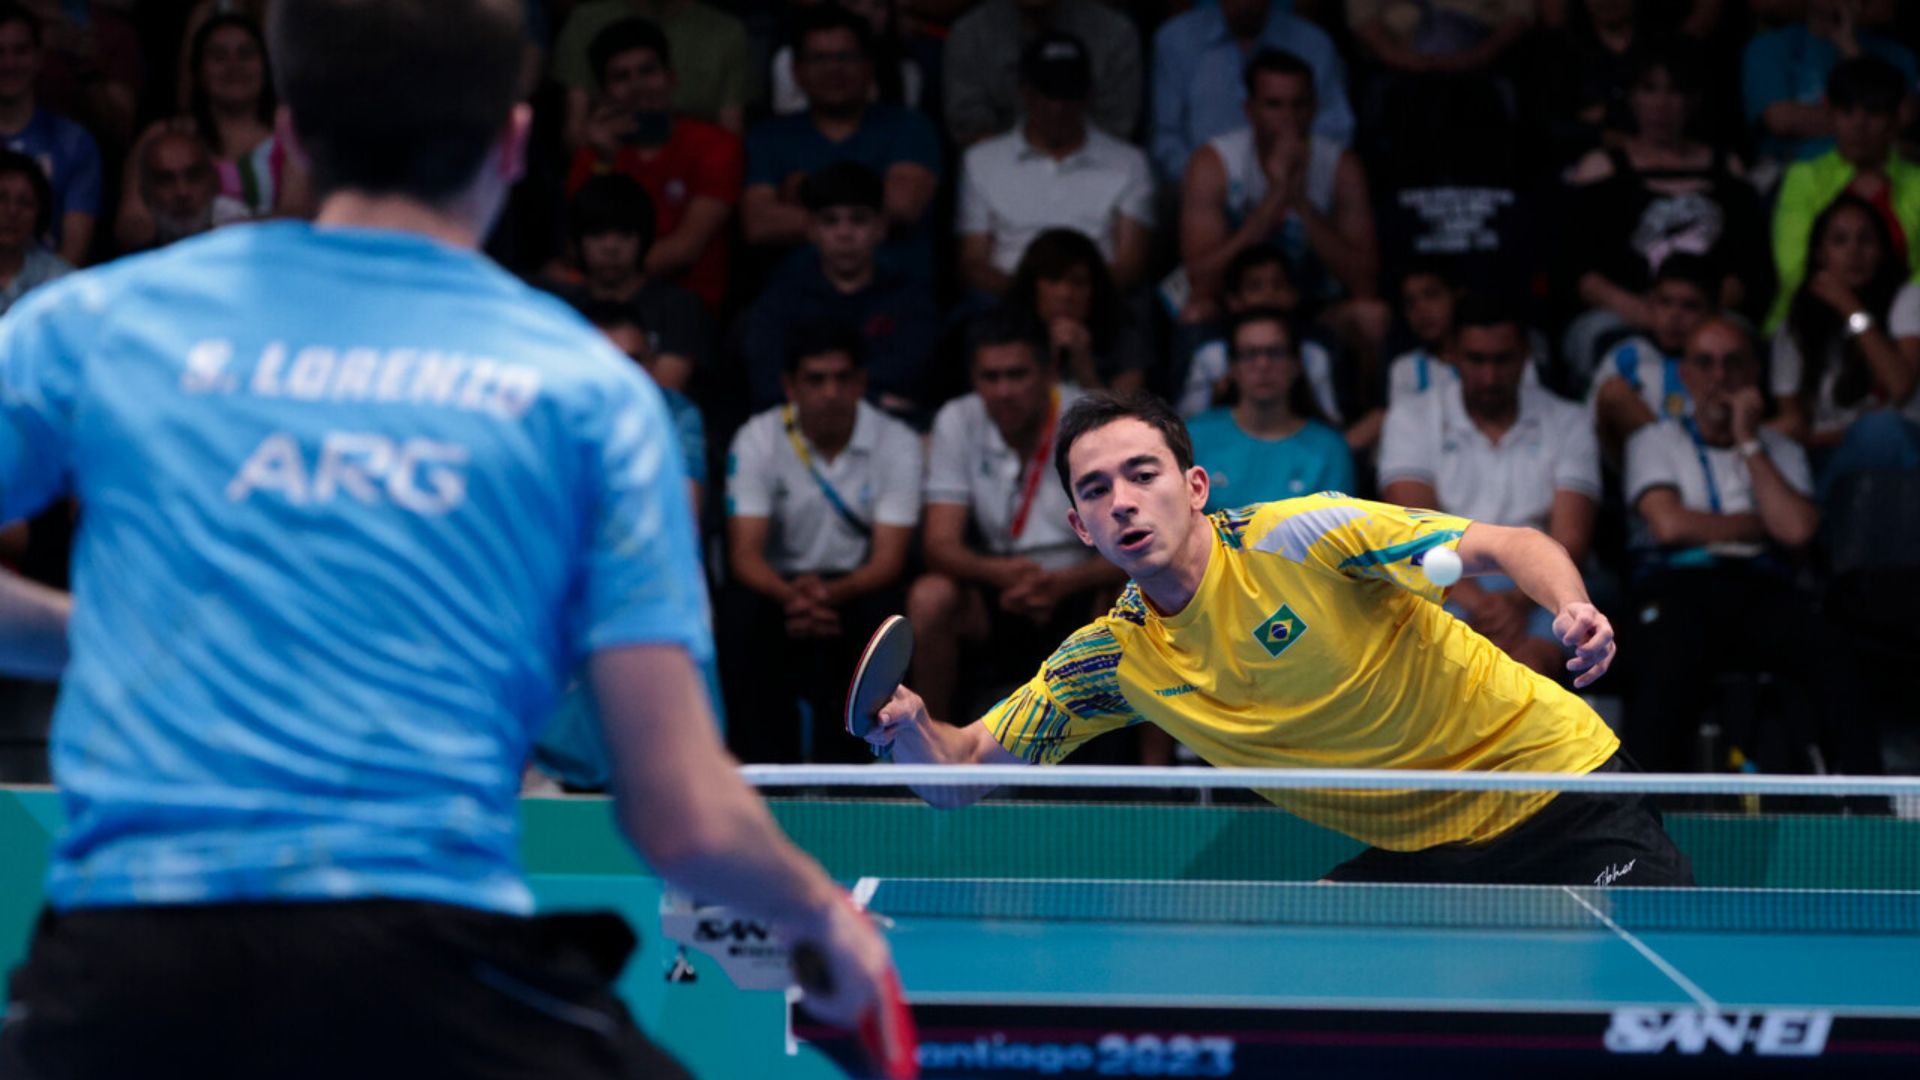 Brazil and Canada to Battle for Gold in Male's Team Table Tennis